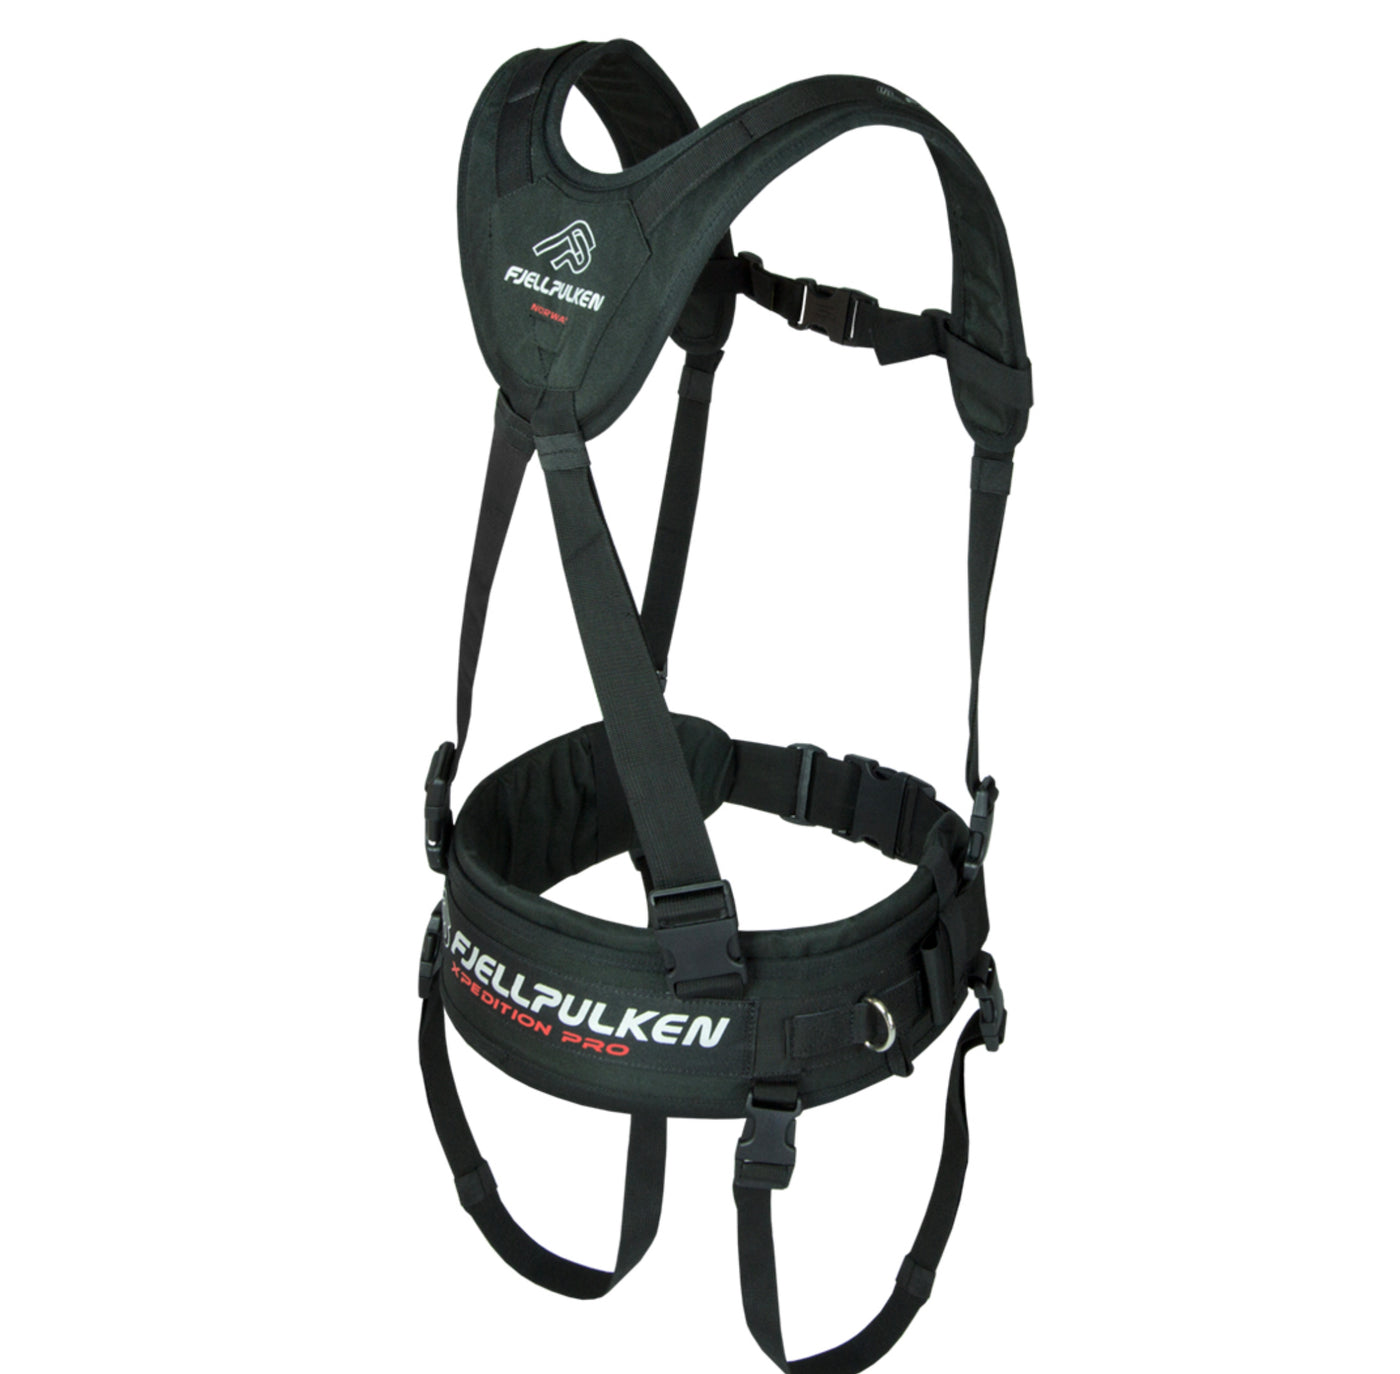 Fjellpulken Pro Expedition Harness